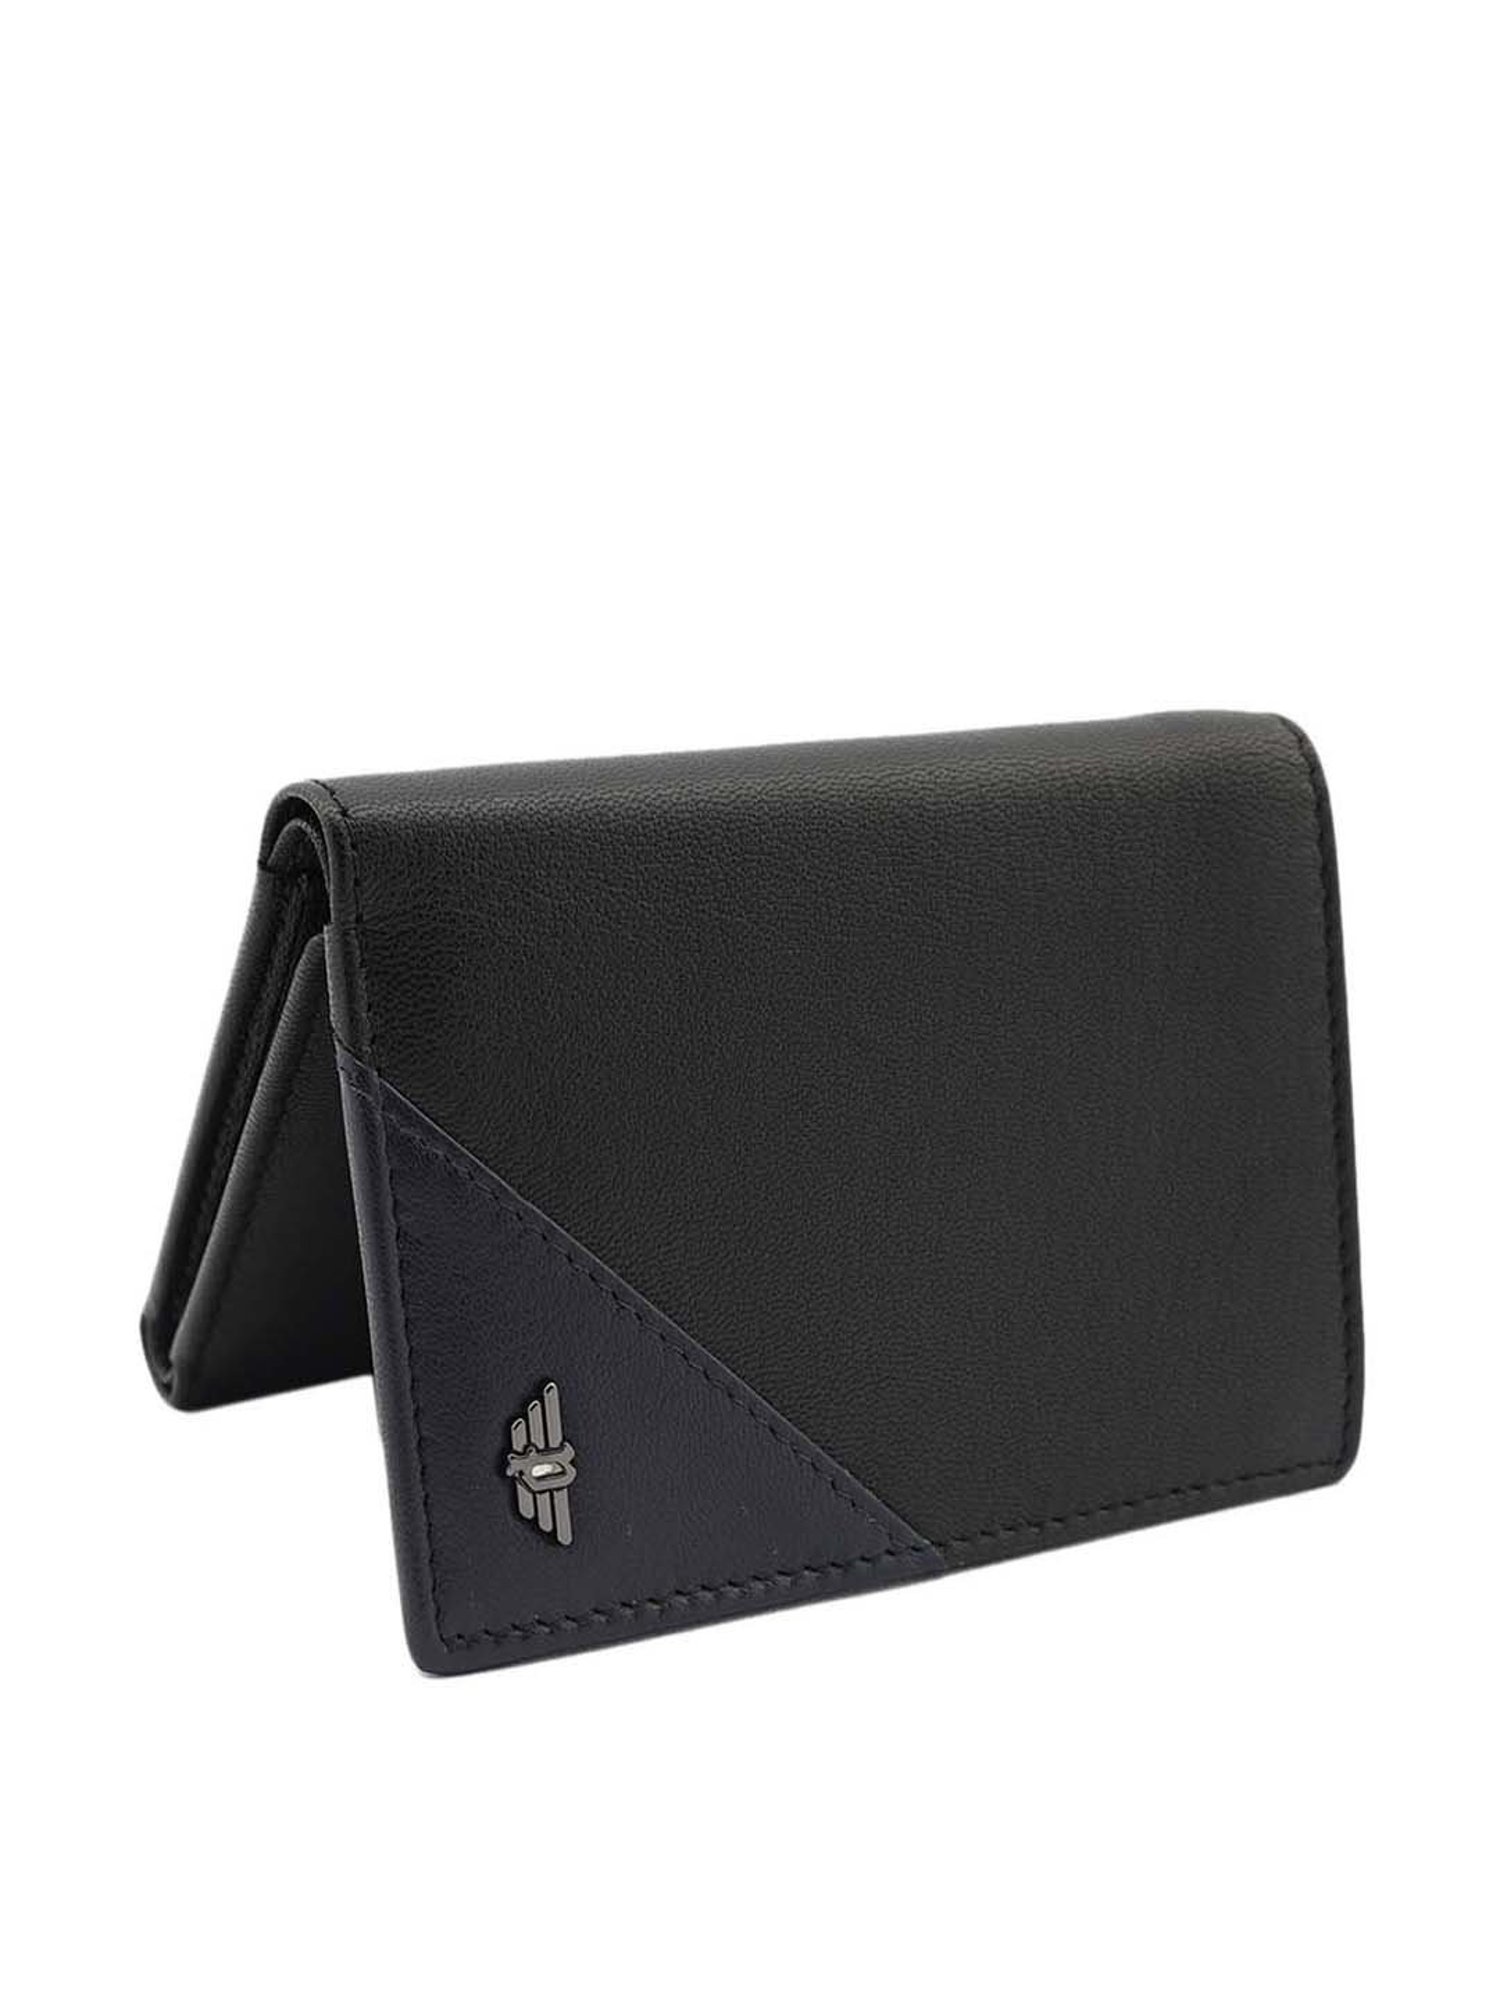 Leather Bi Fold Police Men Wallet, Card Slots: 5 at best price in Ghaziabad  | ID: 24867330848